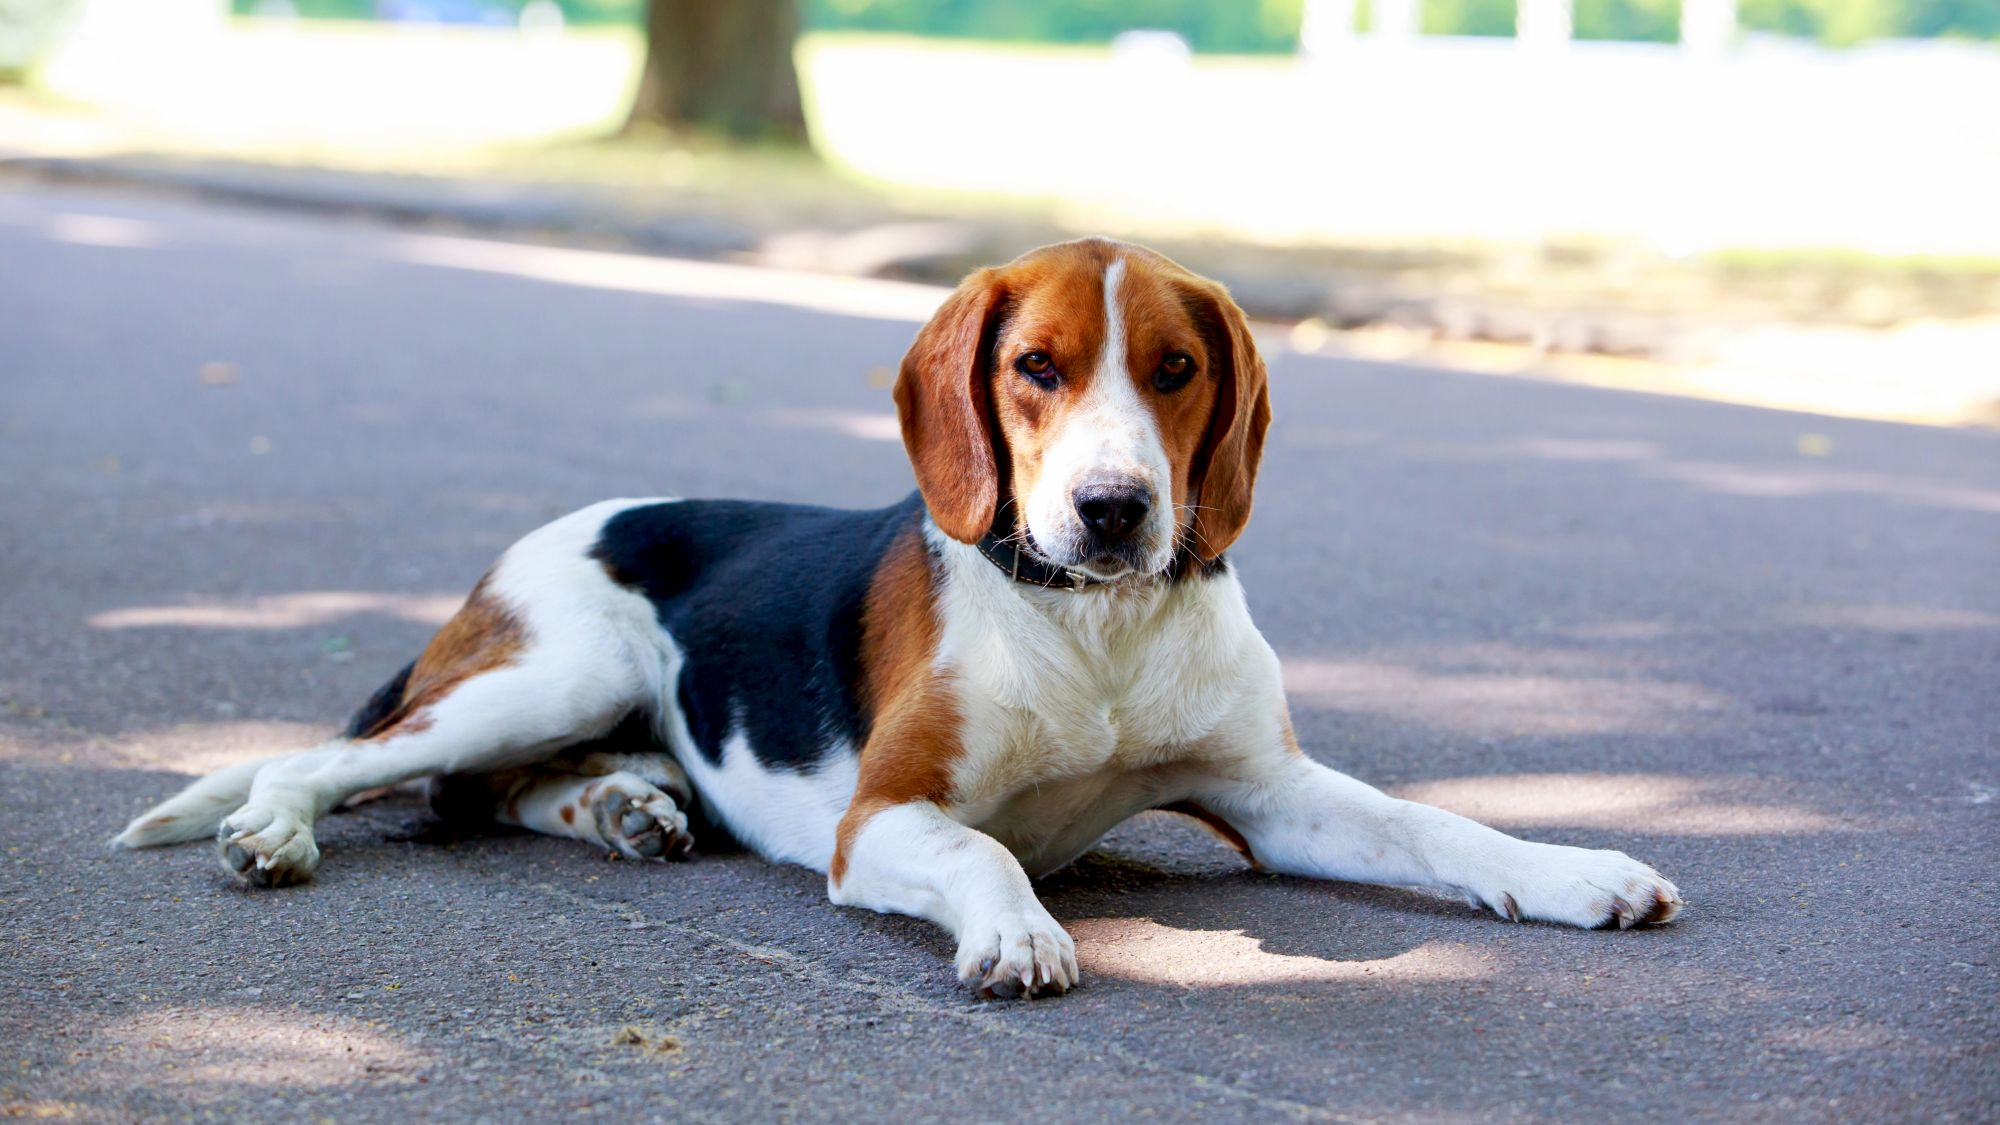 American Foxhound laying on a cemented road